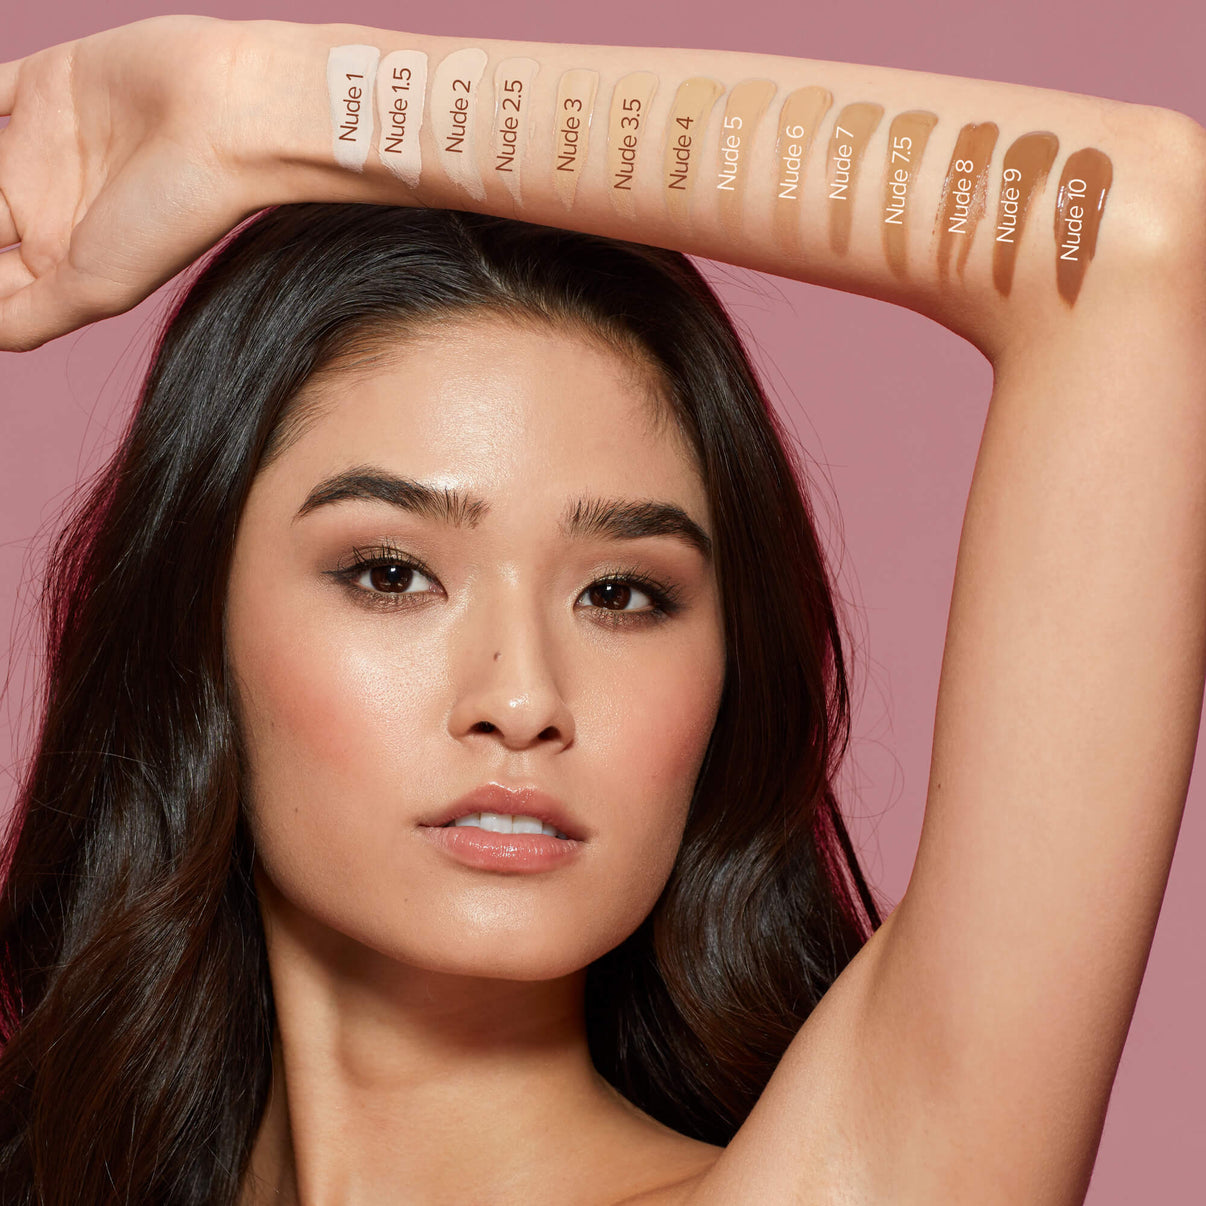 Young woman with swatches on her arm of Tinted Cover nude 5 and other shades